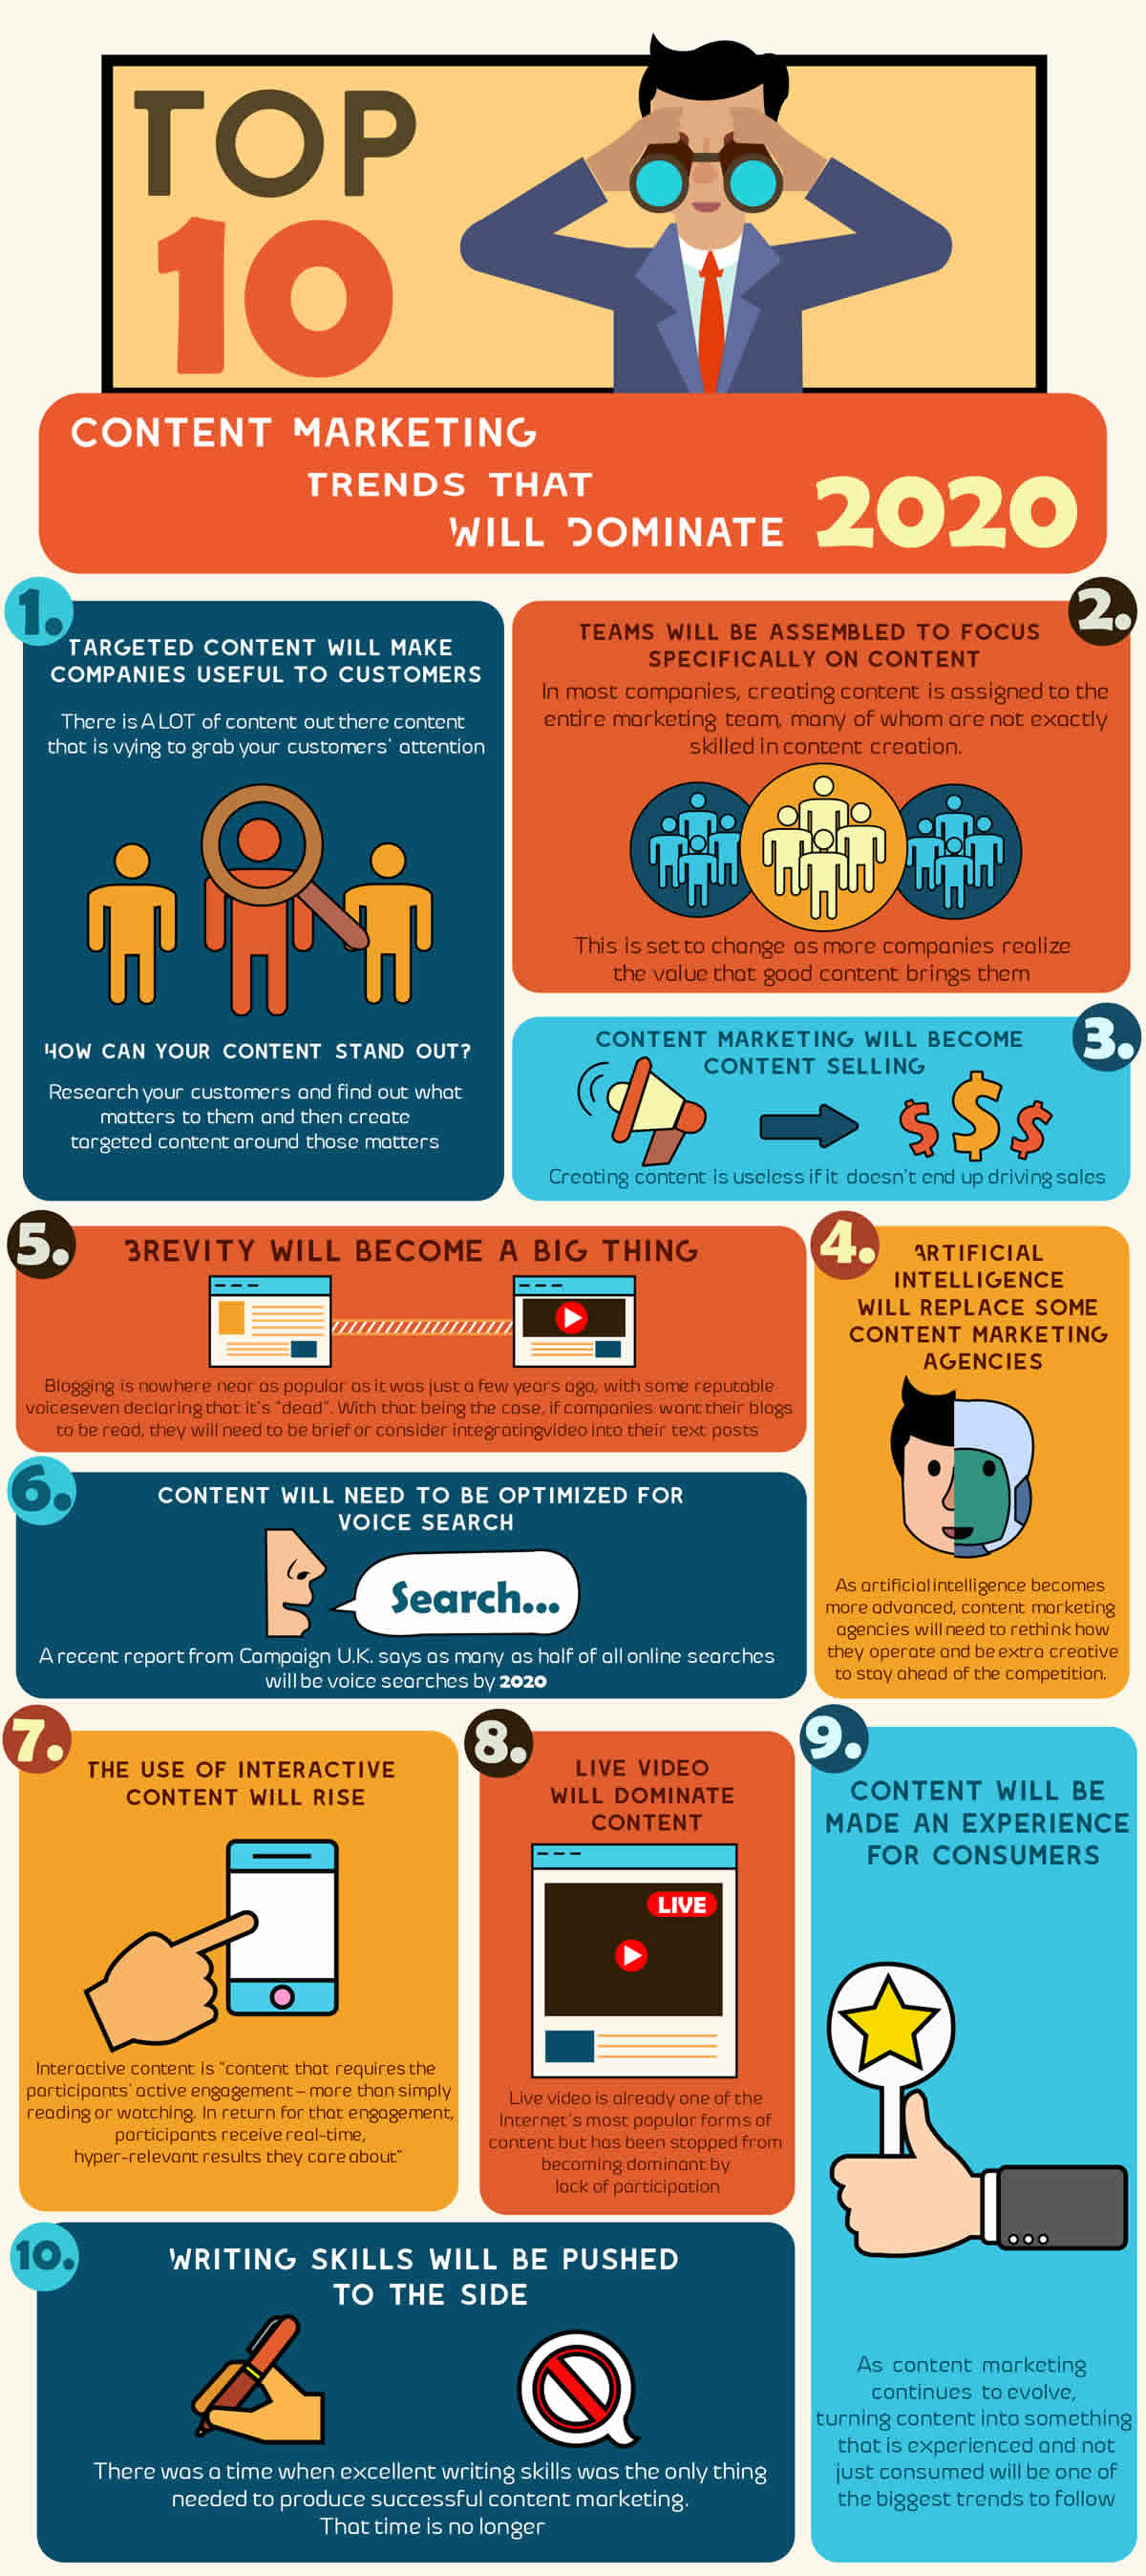 Top Content Marketing Trends In 2020 [Infographic] NC Web Design